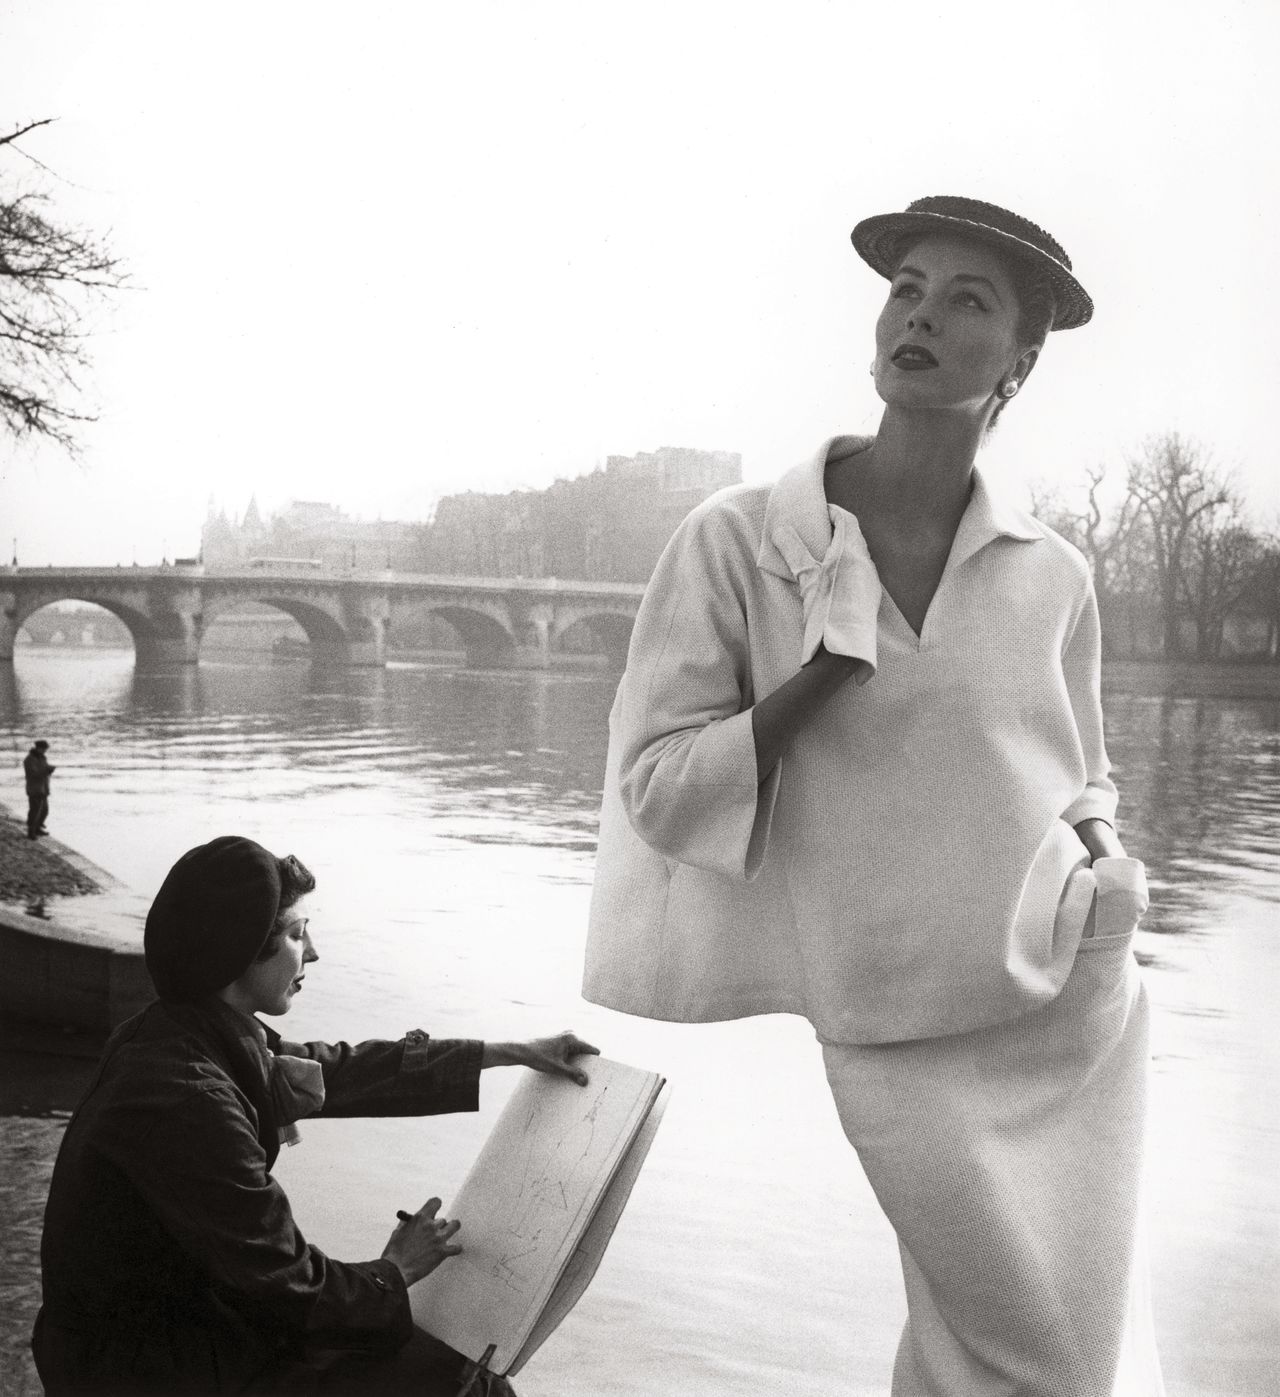 "Suzy Parker by the Seine, Costume by Balenciaga" (1953) by Louise Dahl-Wolfe